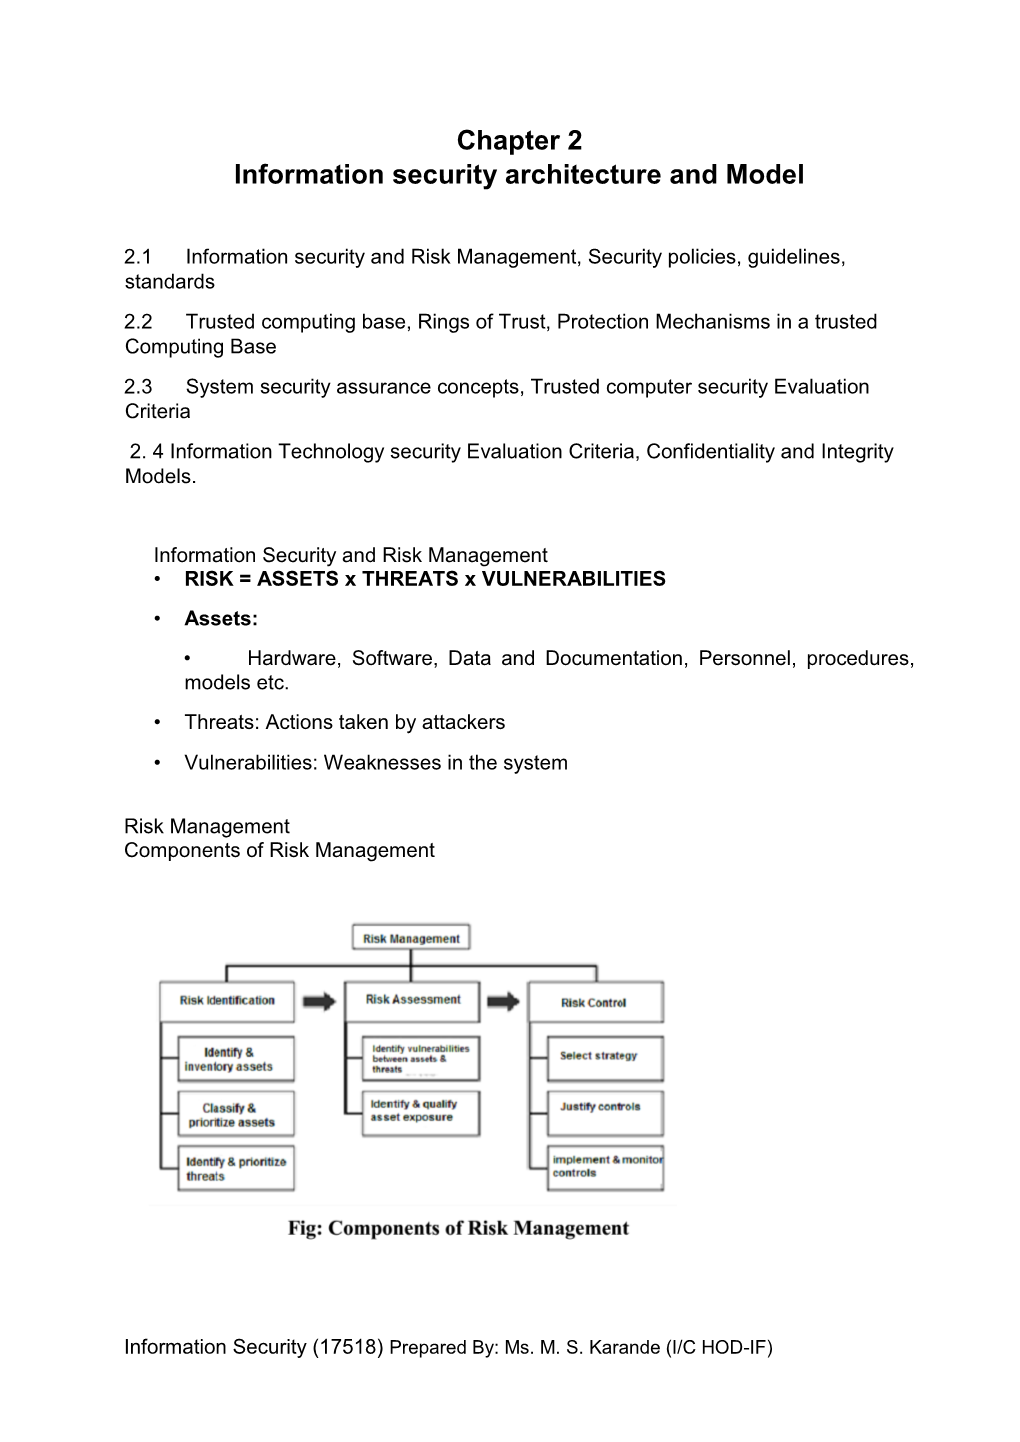 Chapter 2 Information Security Architecture and Model